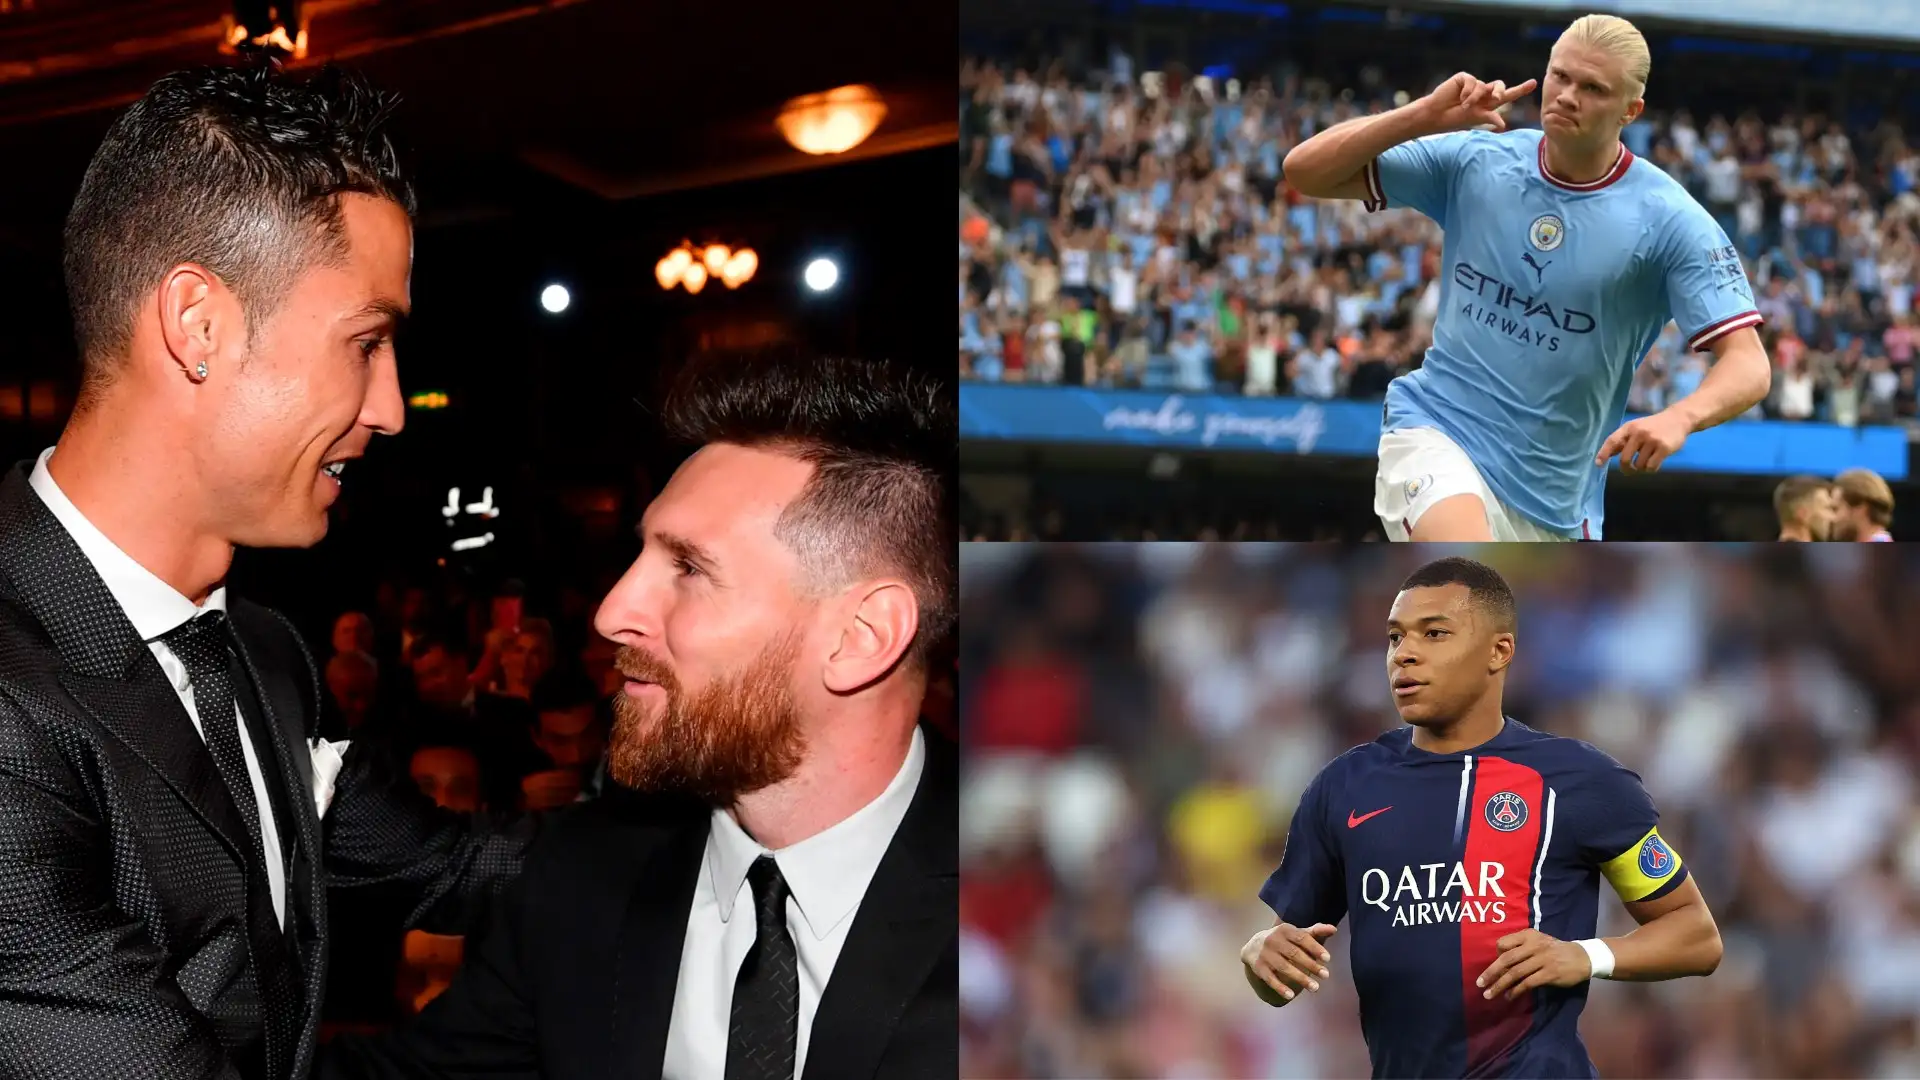 'Impossible' - Erling Haaland and Kylian Mbappe told why they'll never surpass Cristiano Ronaldo and Lionel Messi